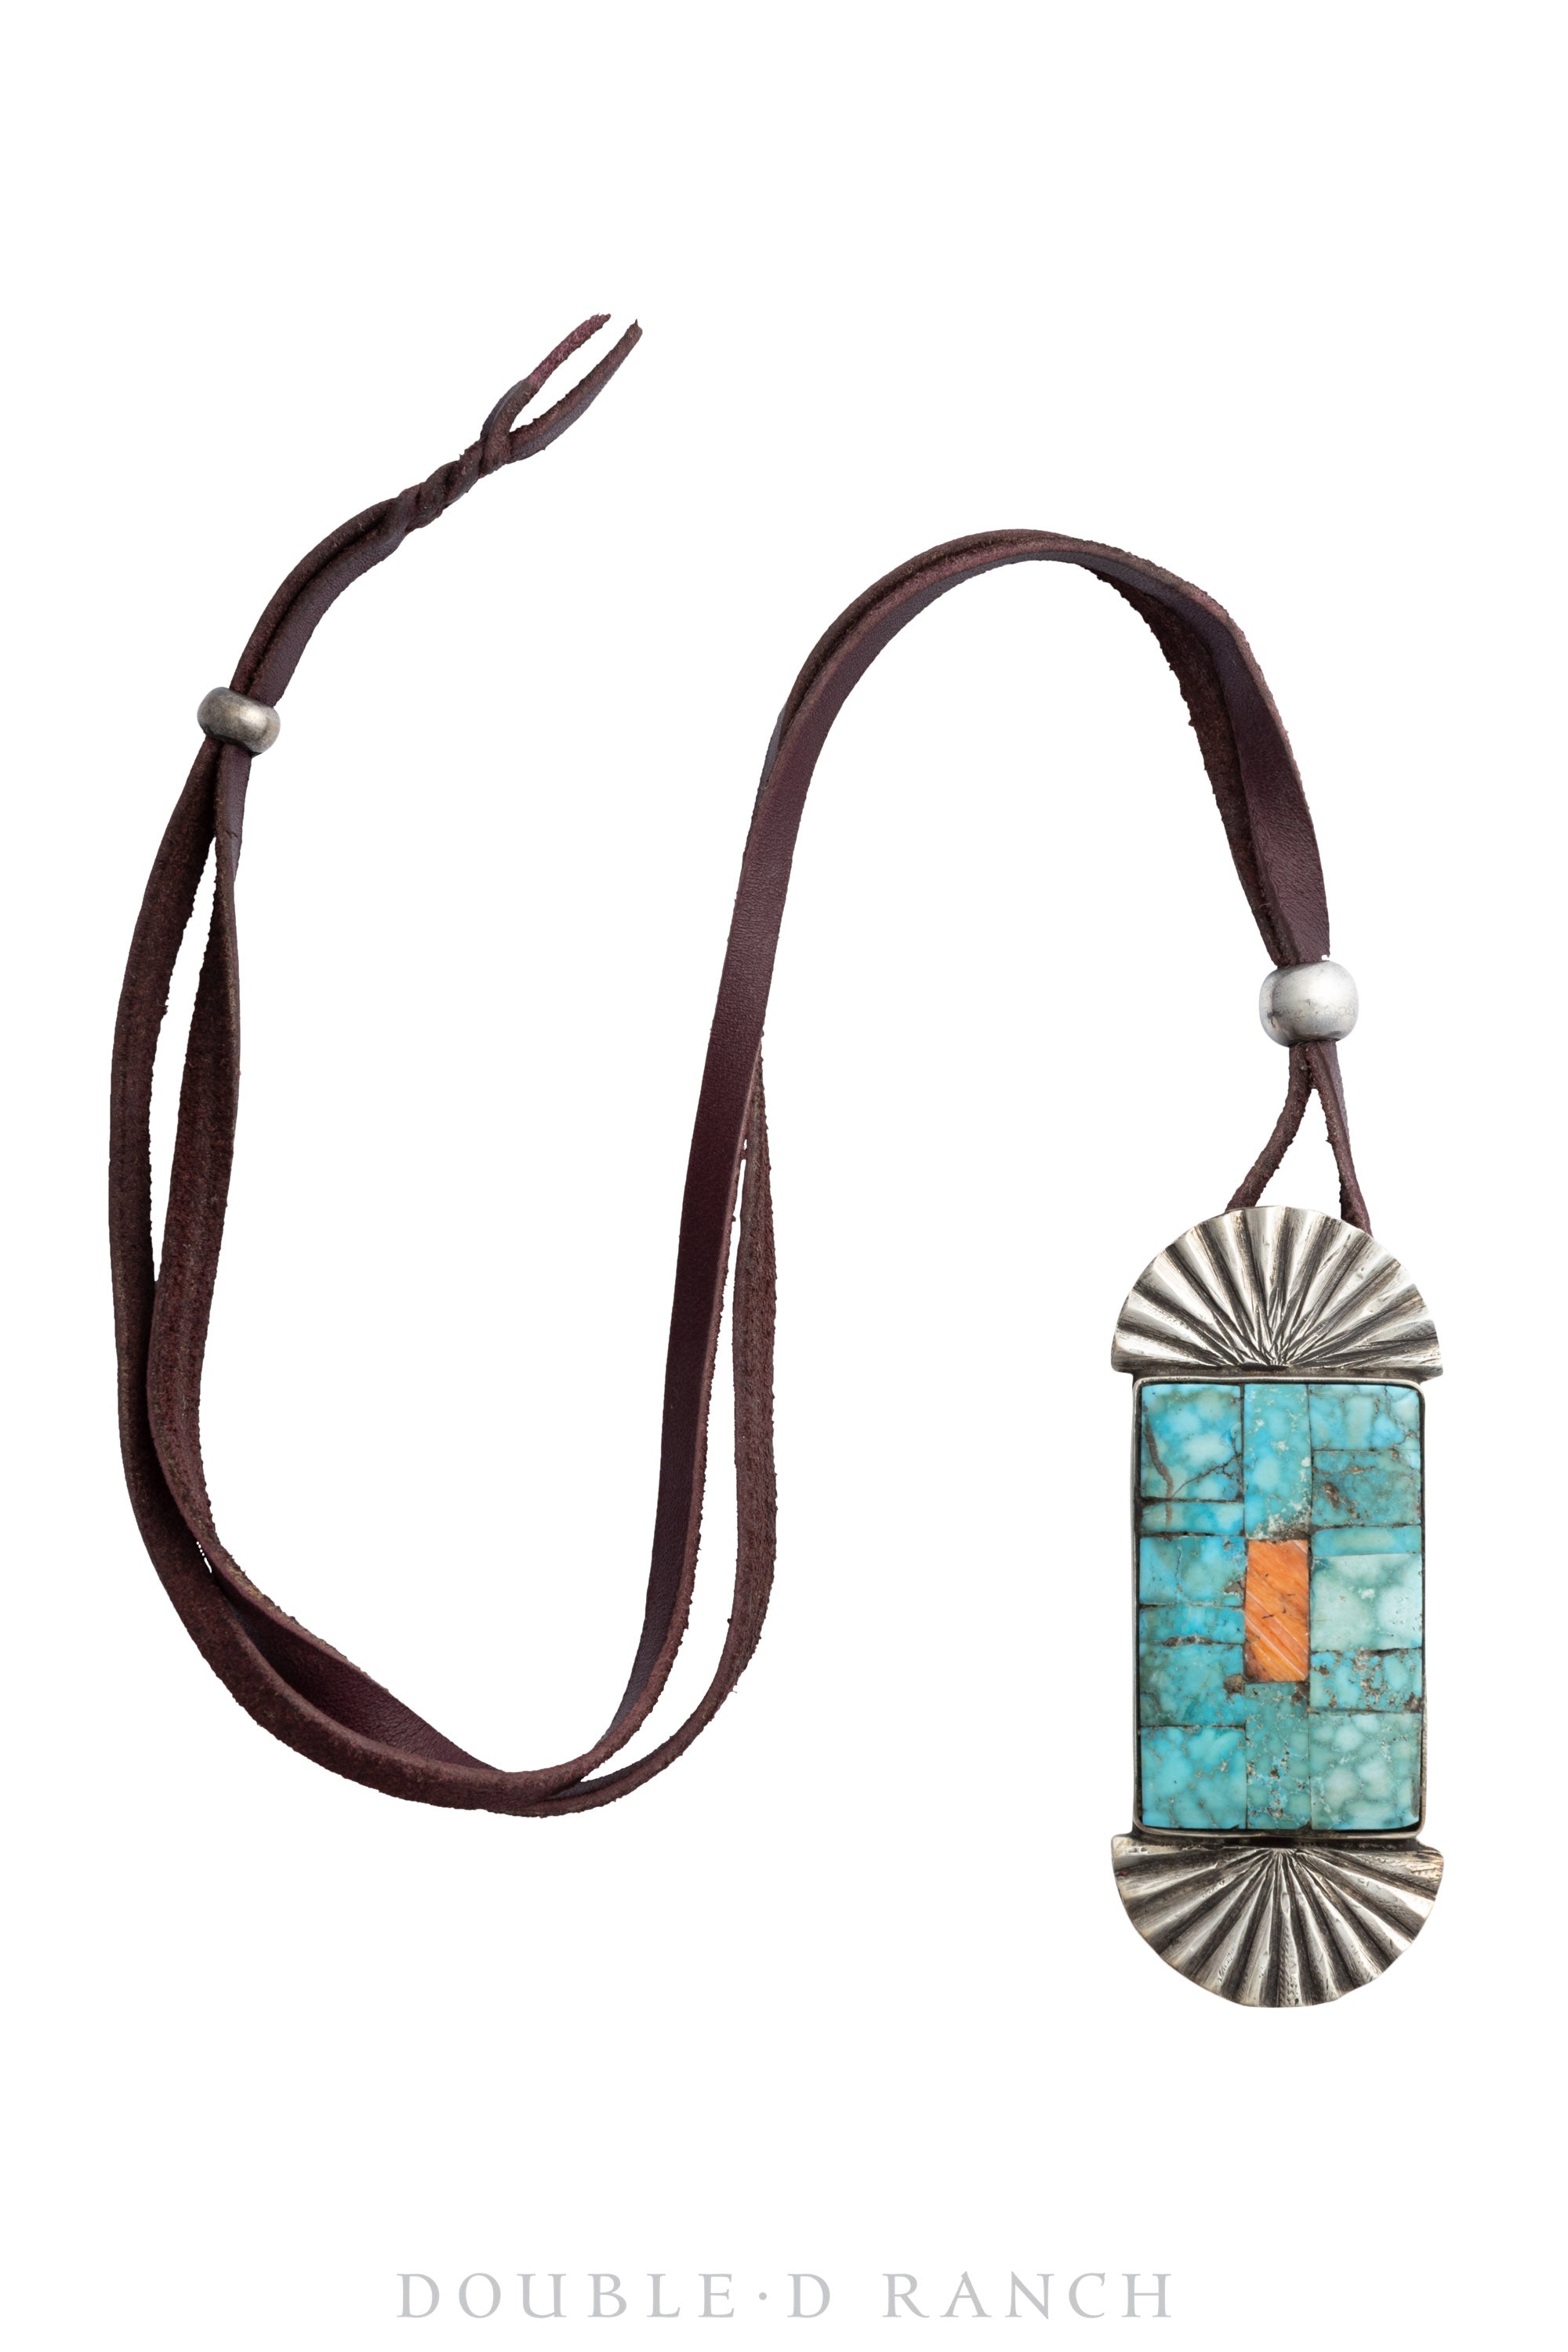 Necklace, Leather Thong, Turquoise With Mixed Stones, Inlay, Jock Favour Hallmark, Artisan, Contemporary, 1882